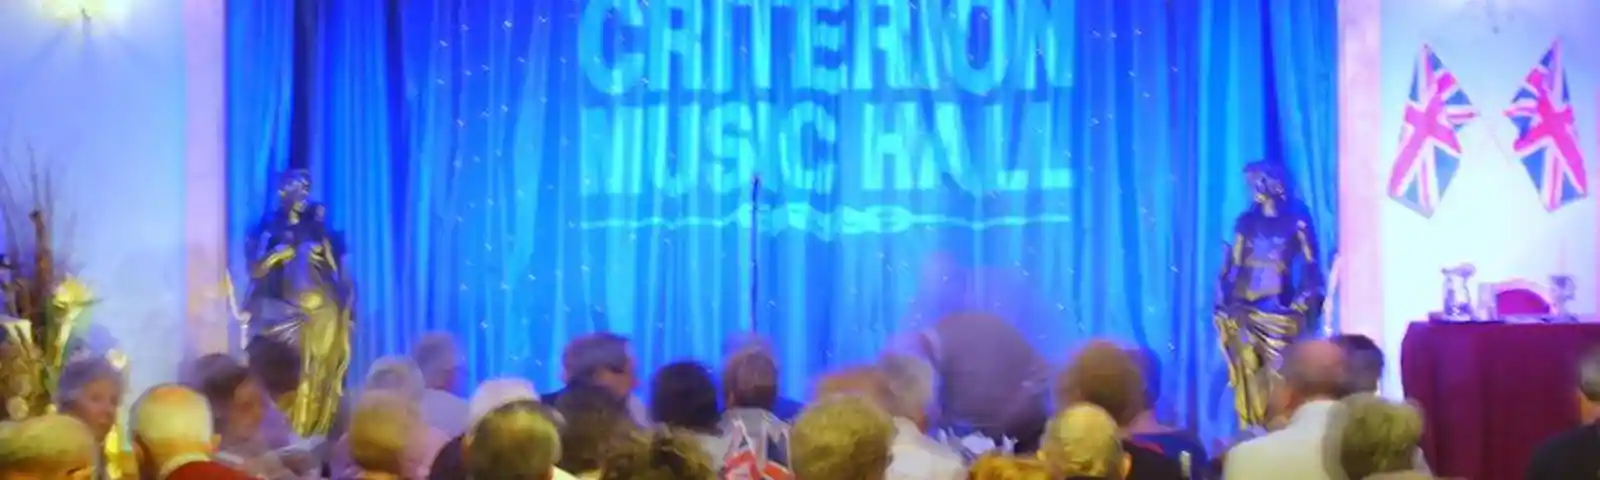 Music Hall at the Criterion Picture.jpg